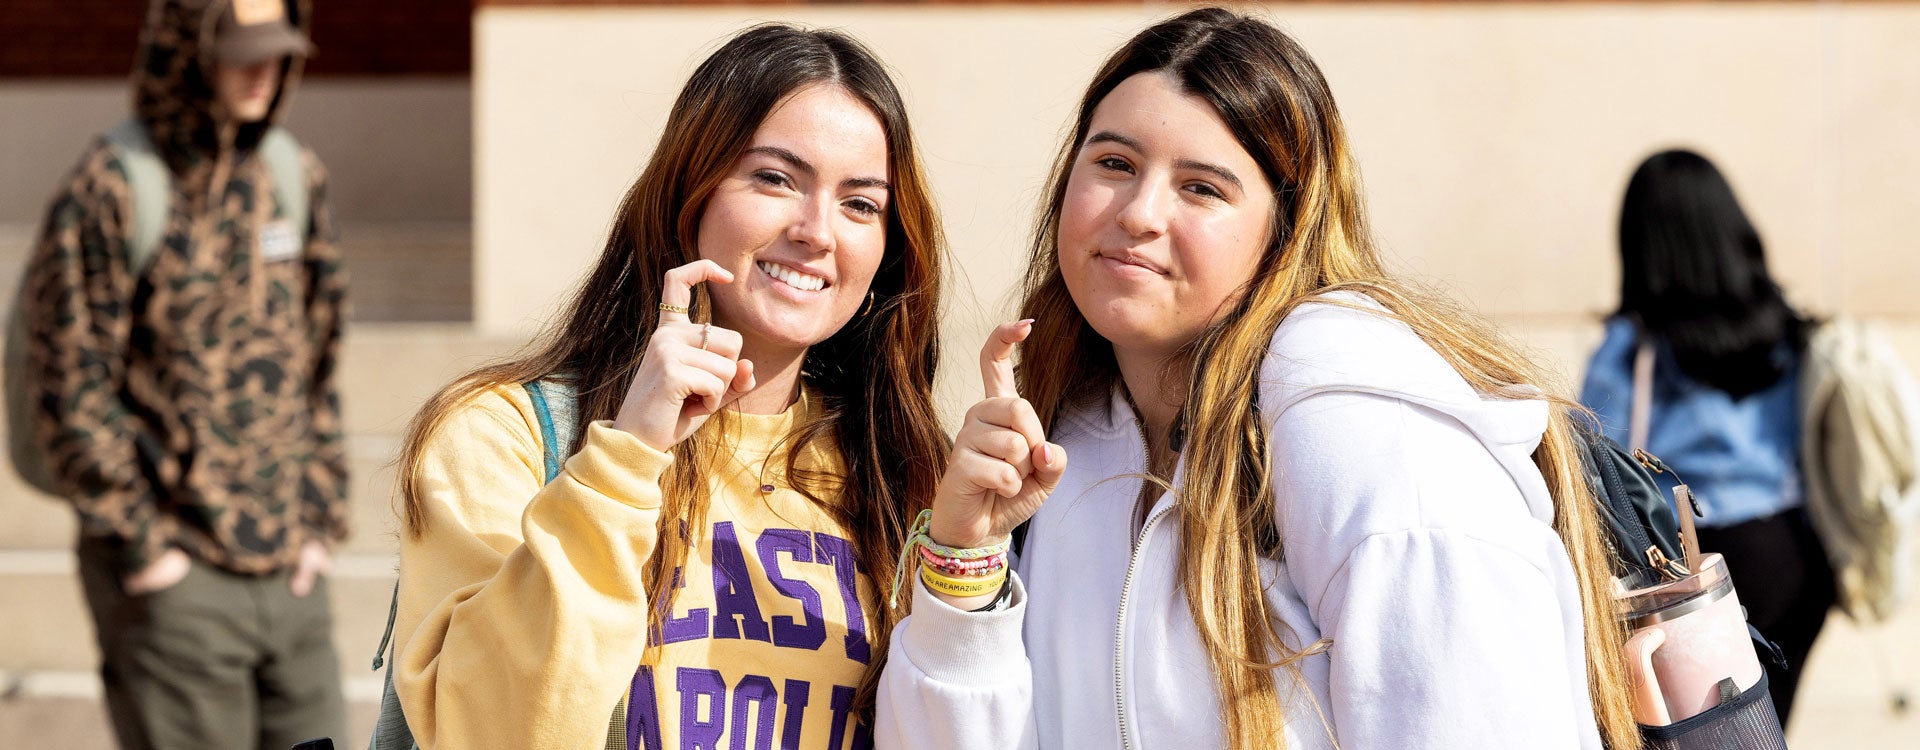 Two female students showing their Pirate spirit.